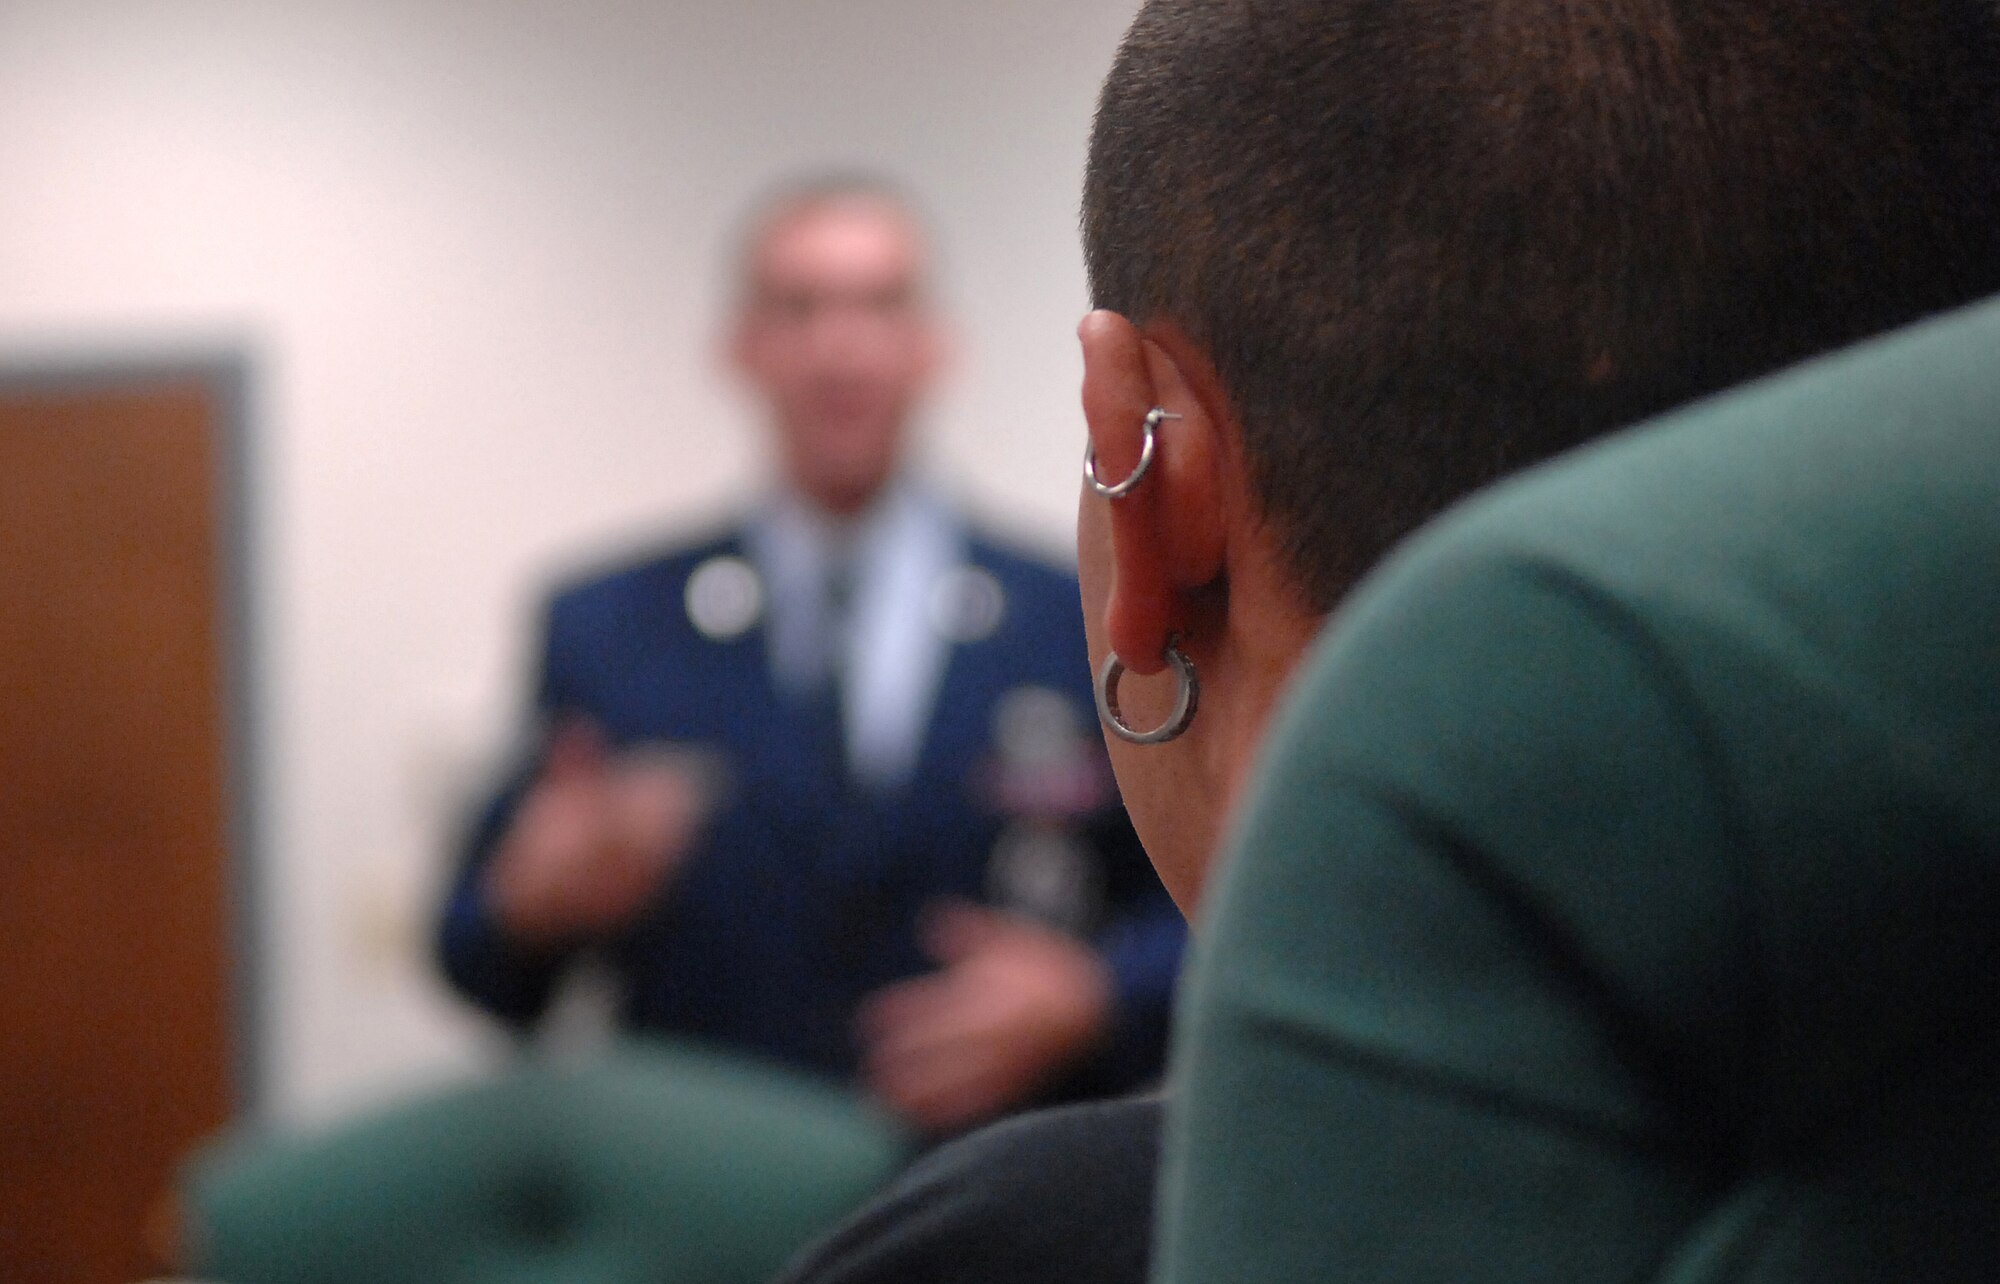 Anthony, 18, listens as Air Force recruiter Staff Sgt. Richard Cordova talks about the benifits of "crossing into the blue."